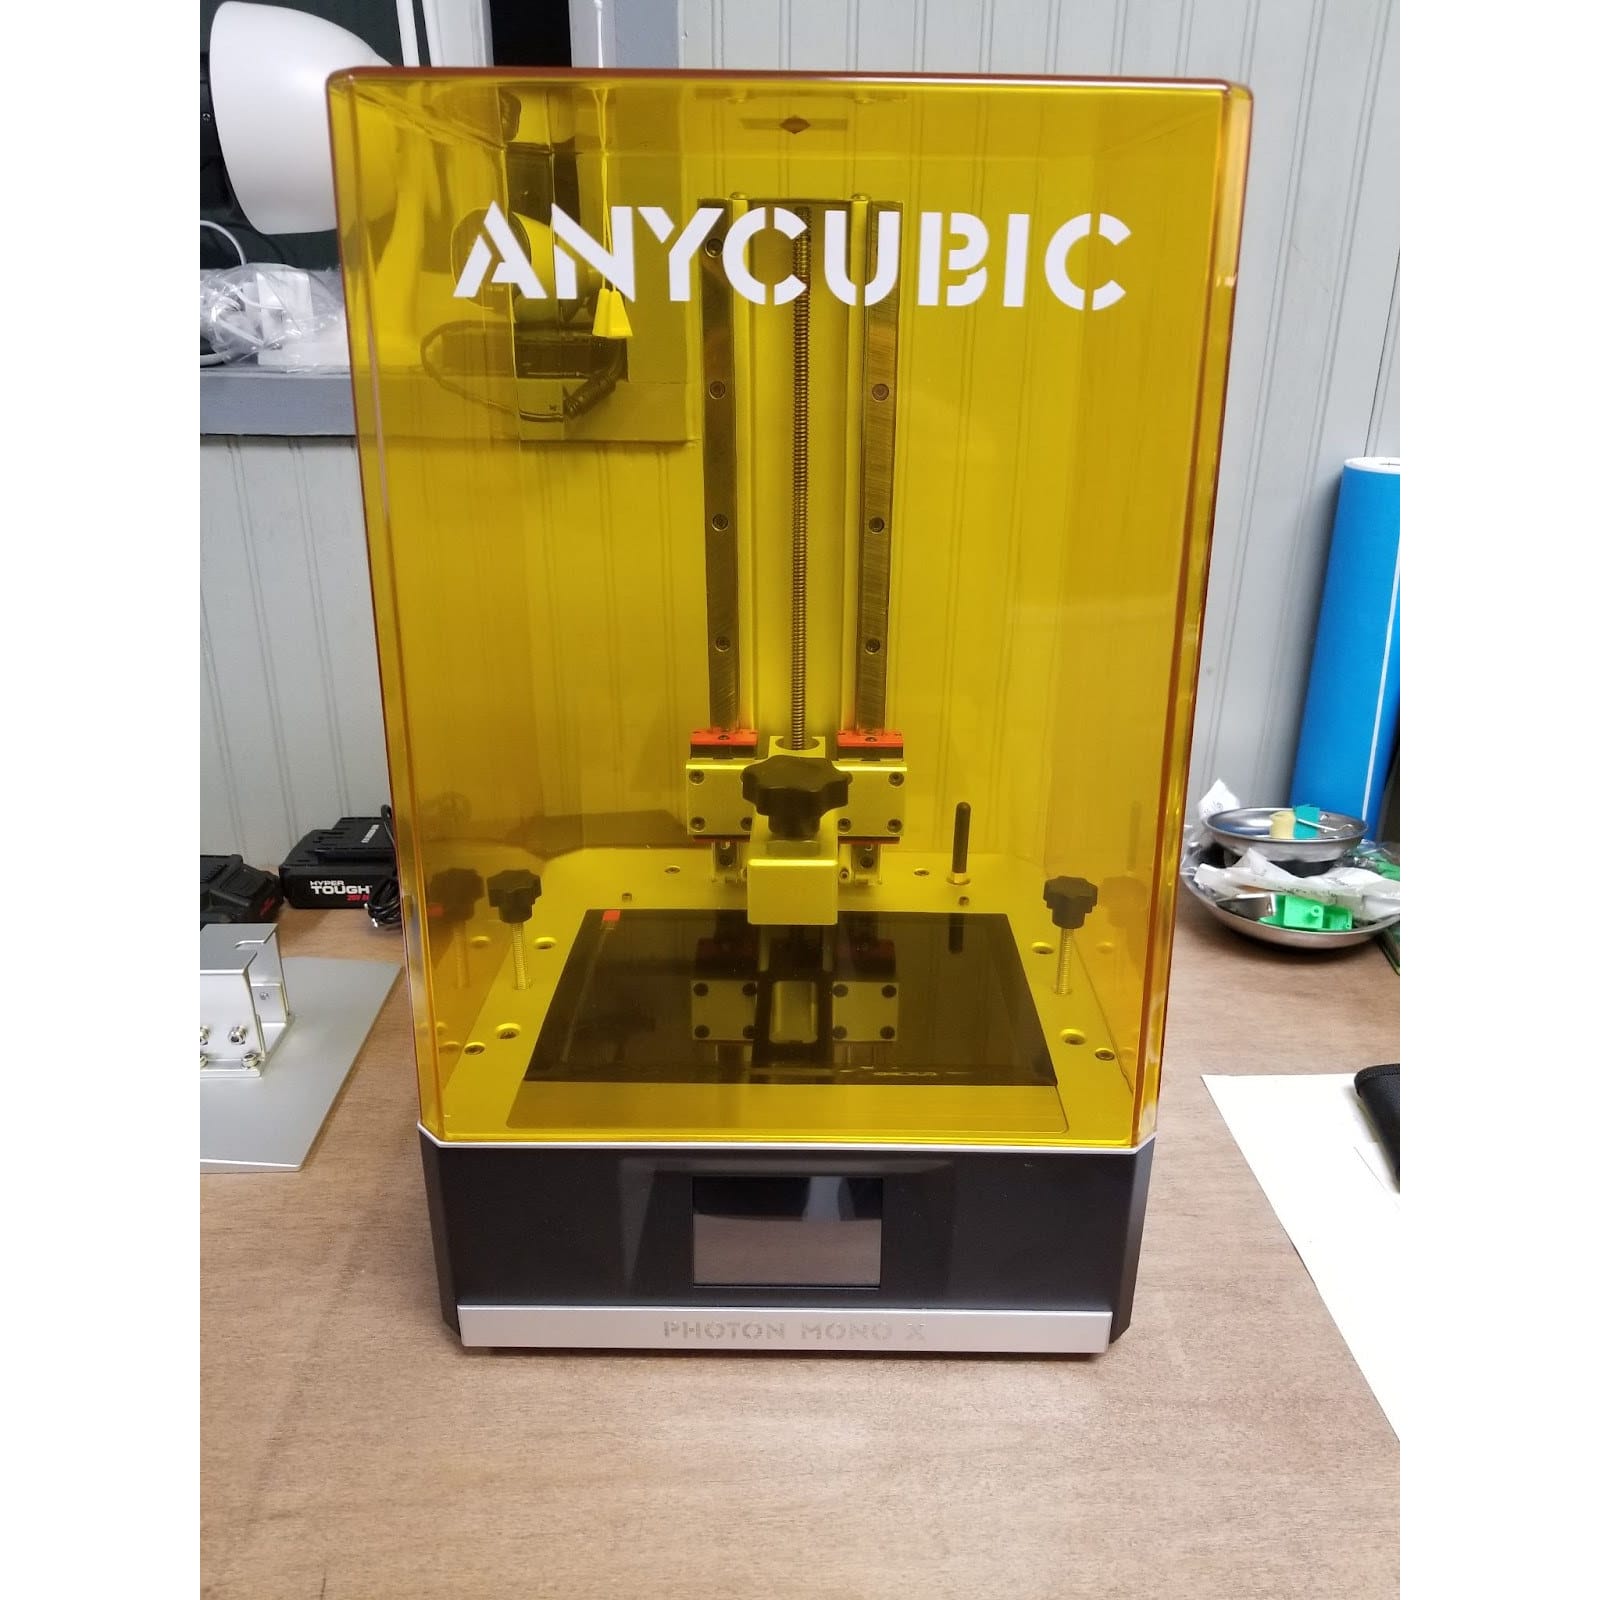 Anycubic Mono X resin 3D printer review